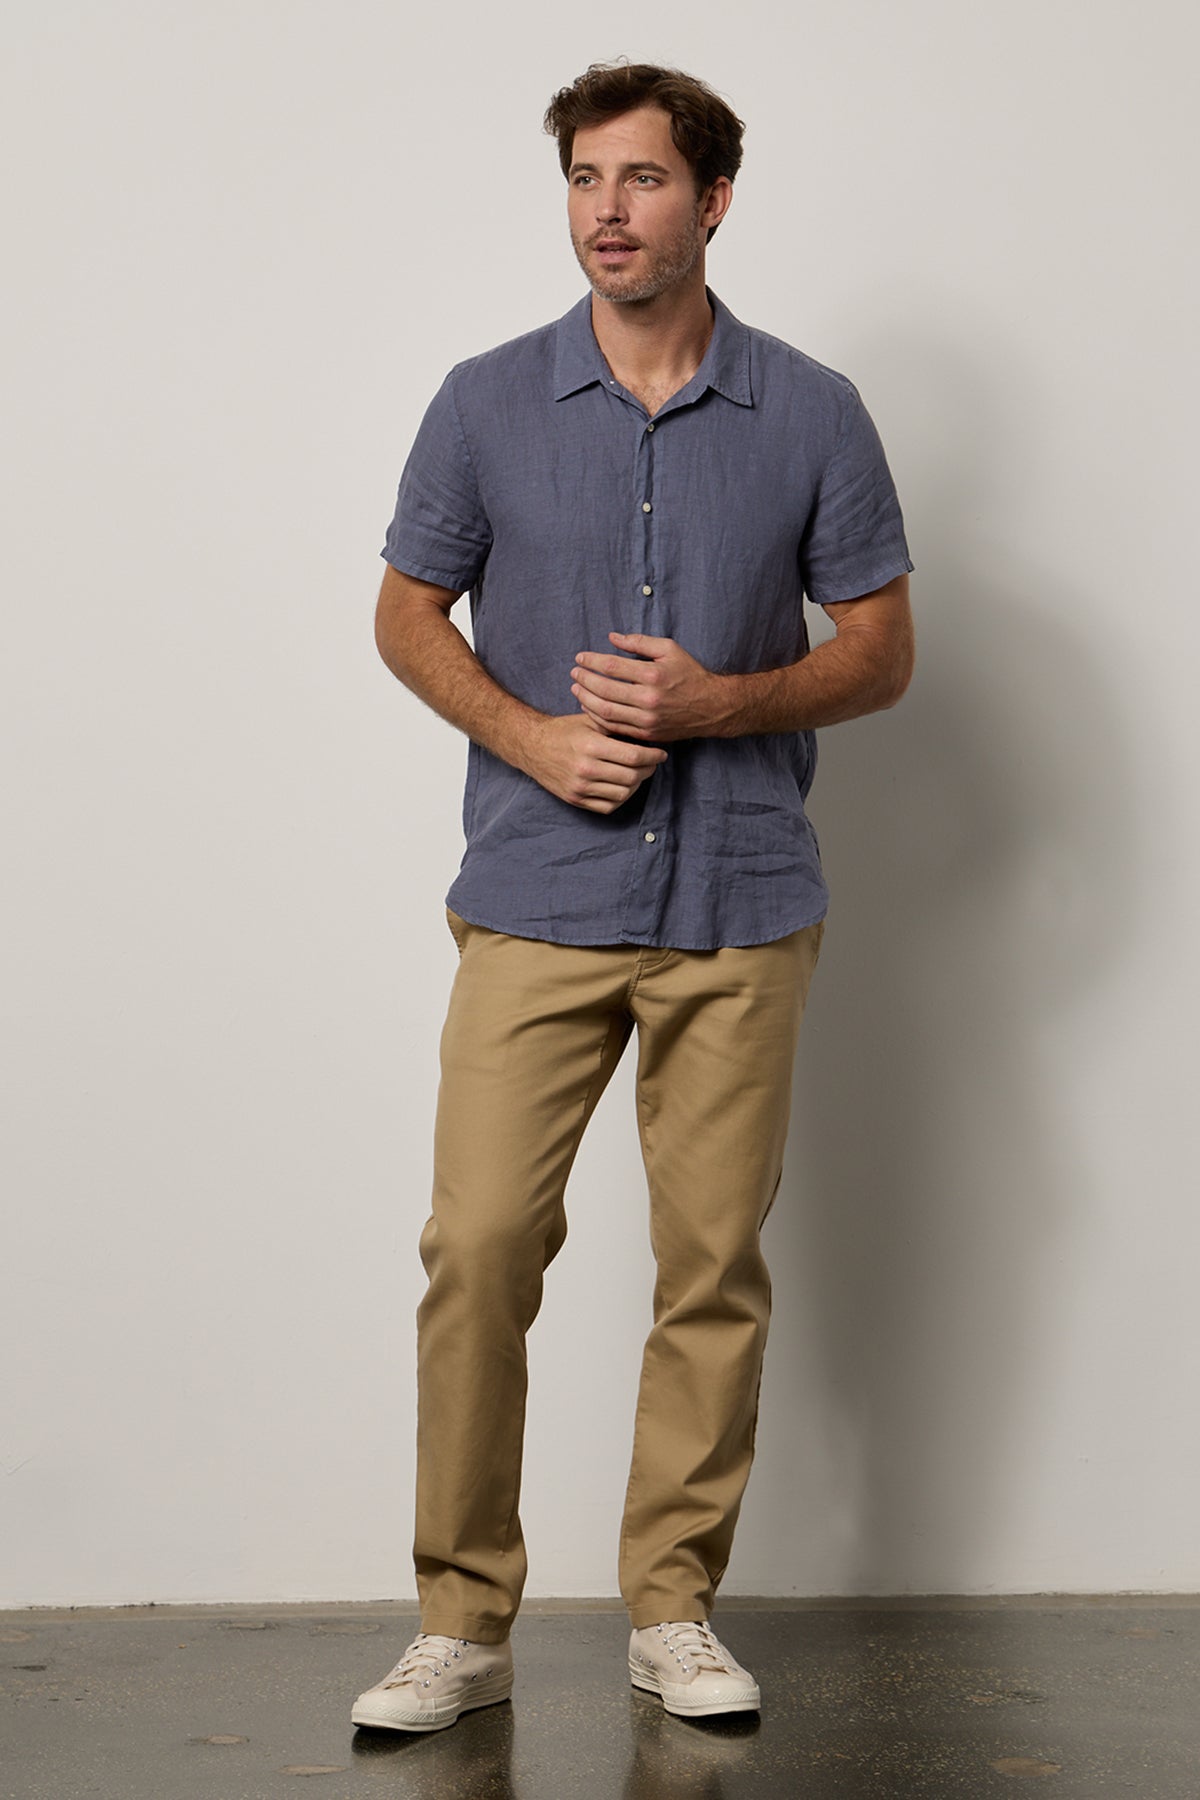 Mackie Button-Up Shirt in baltic blue linen with Aiden pants in khaki full length front-26343174996161